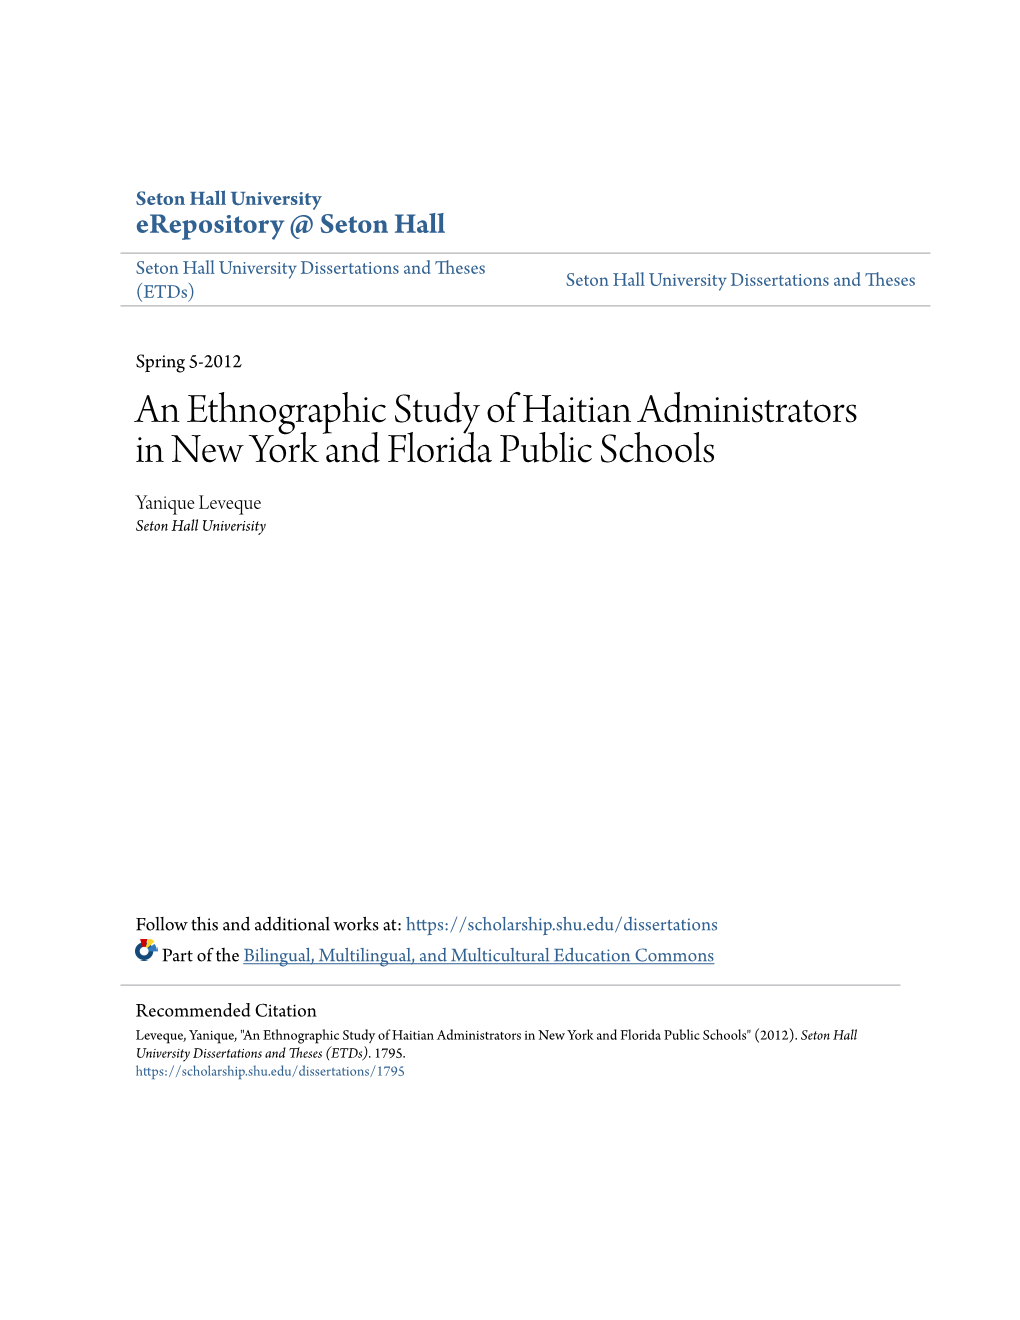 An Ethnographic Study of Haitian Administrators in New York and Florida Public Schools Yanique Leveque Seton Hall Univerisity